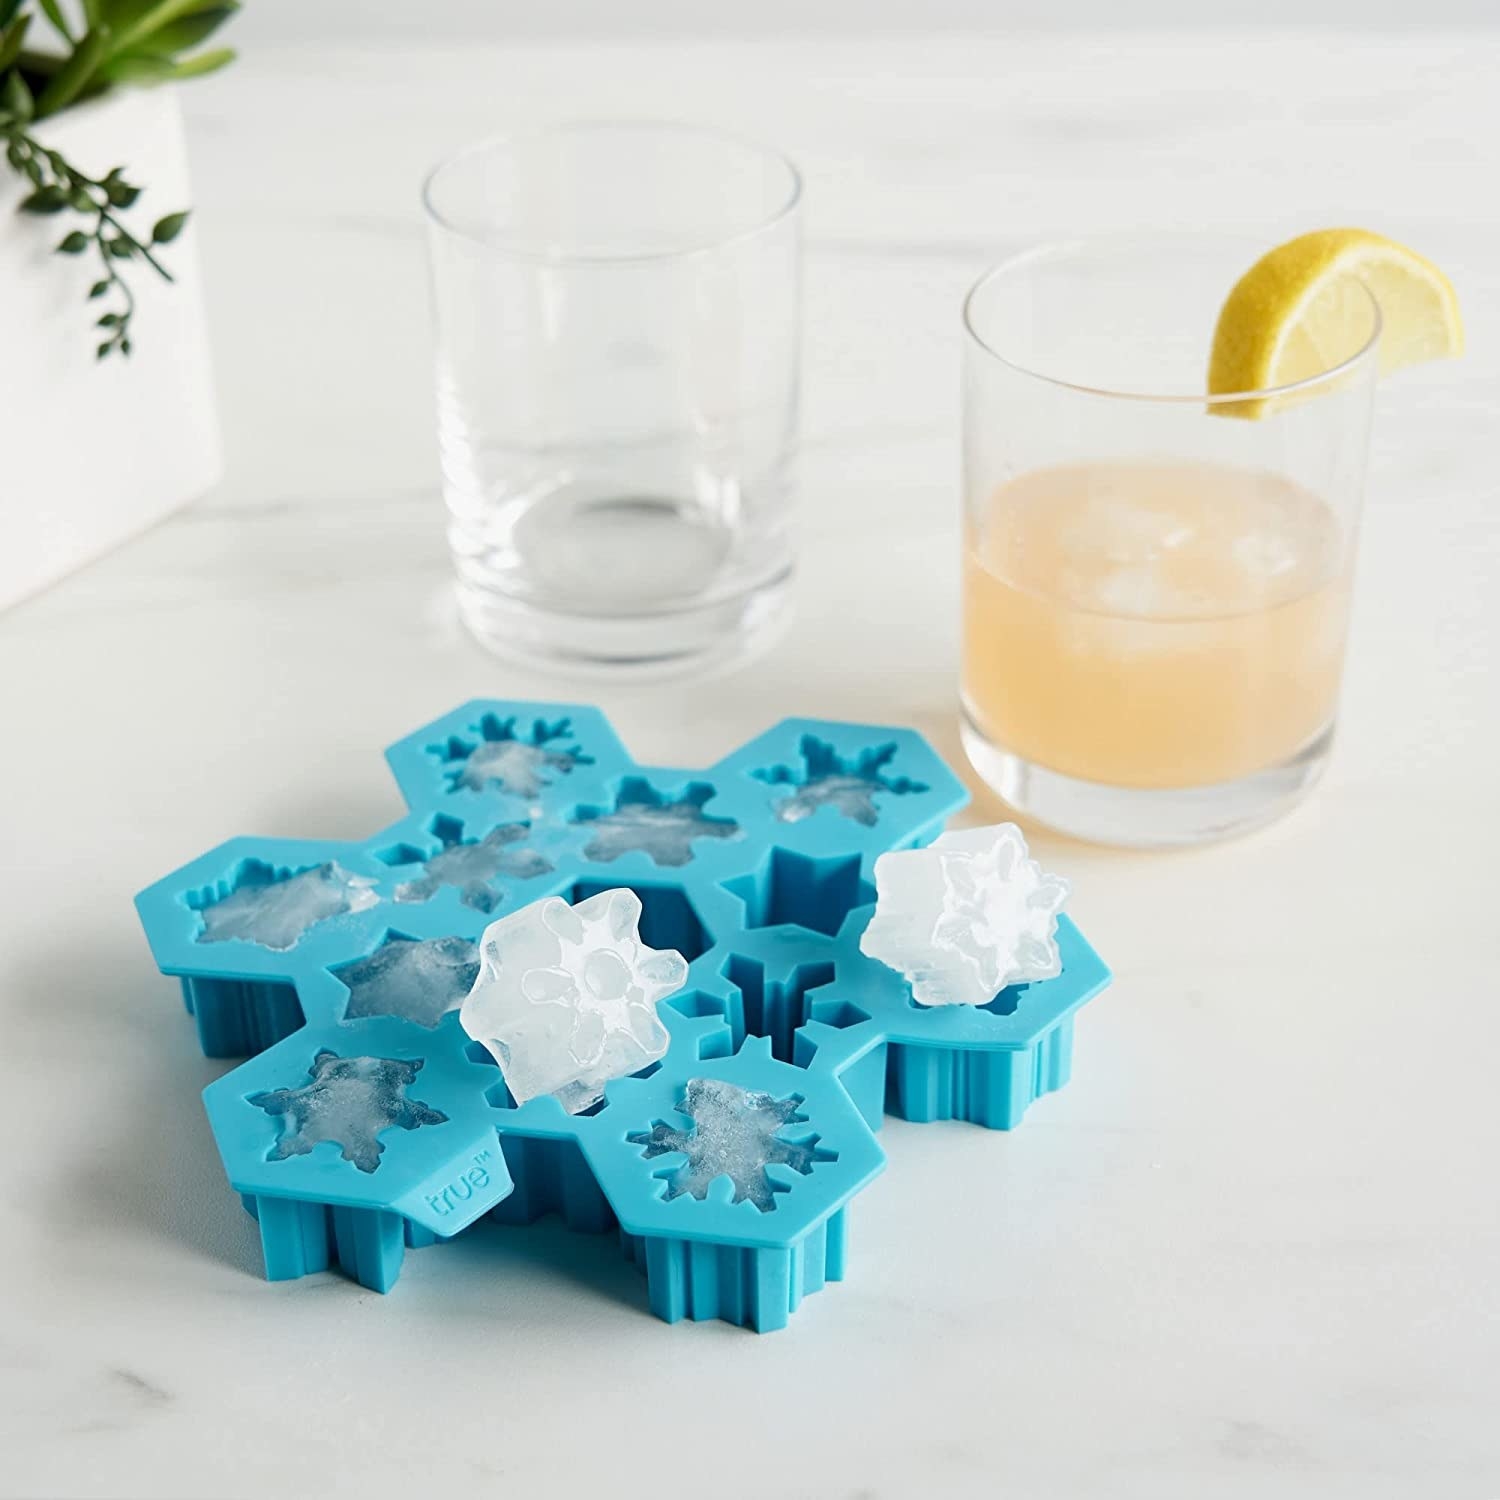 The ice cube tray in front of two glasses on a marble counter